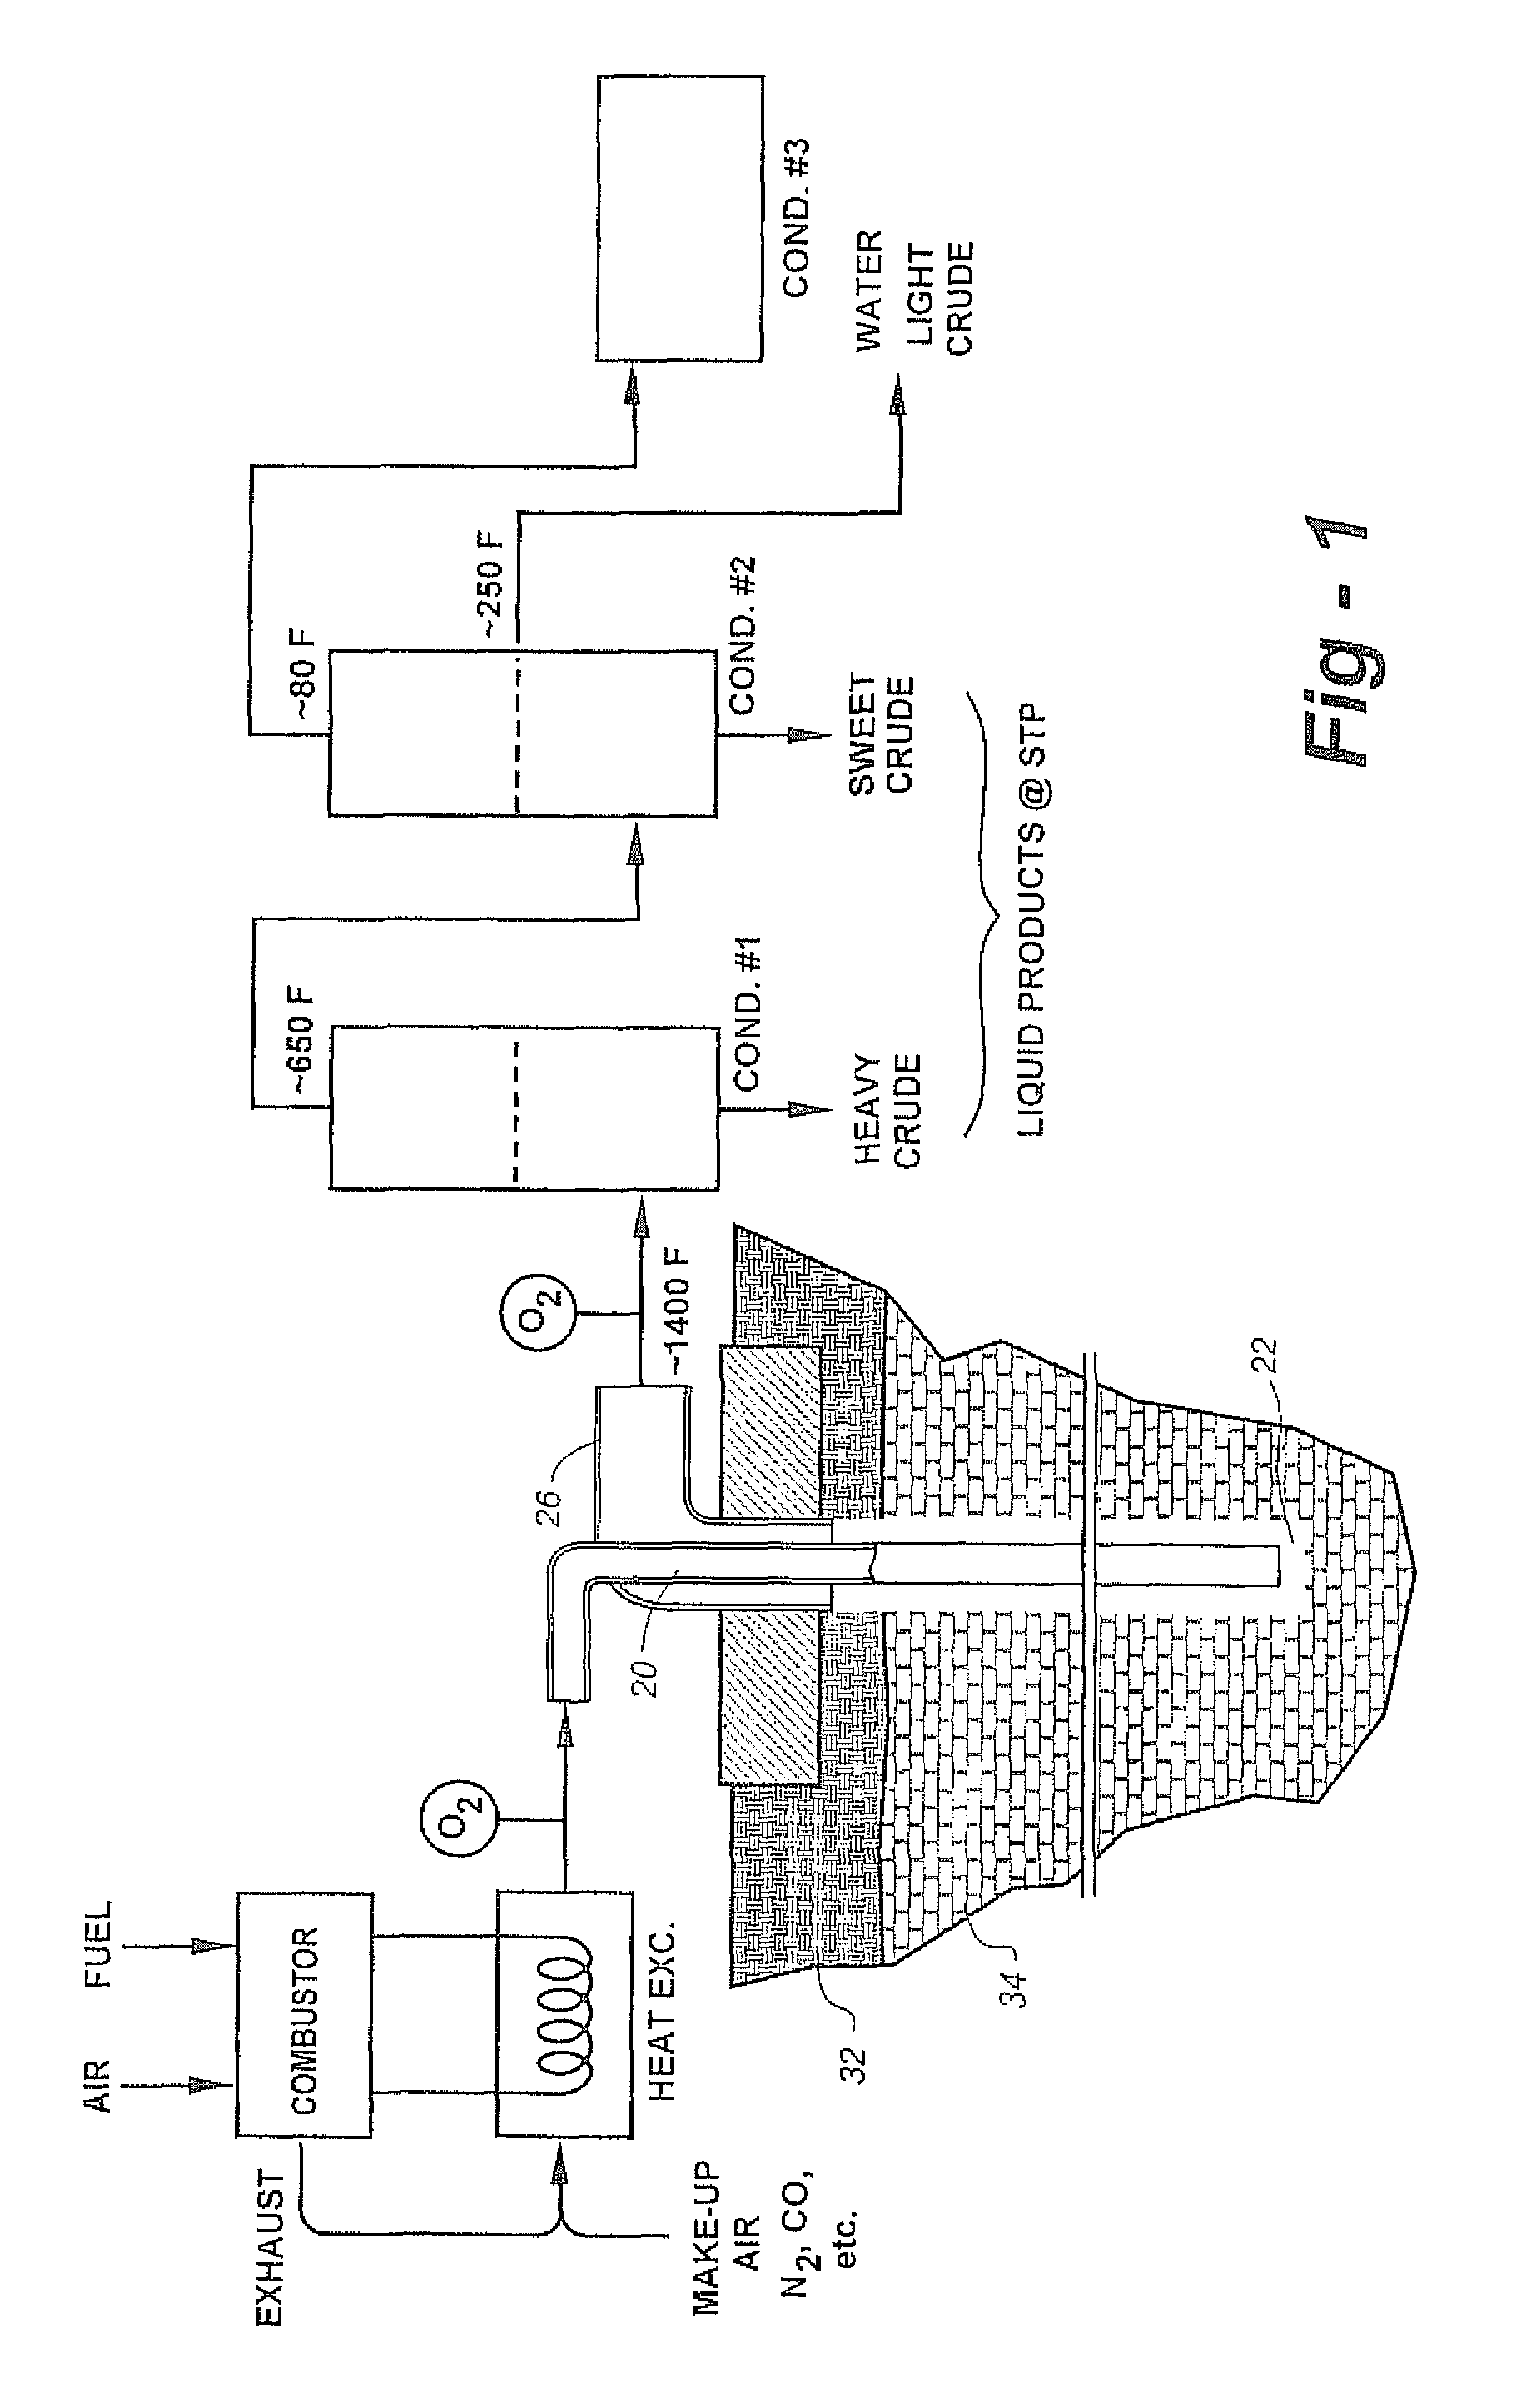 Apparatus and methods for adjusting operational parameters to recover hydrocarbonaceous and additional products from oil shale and sands